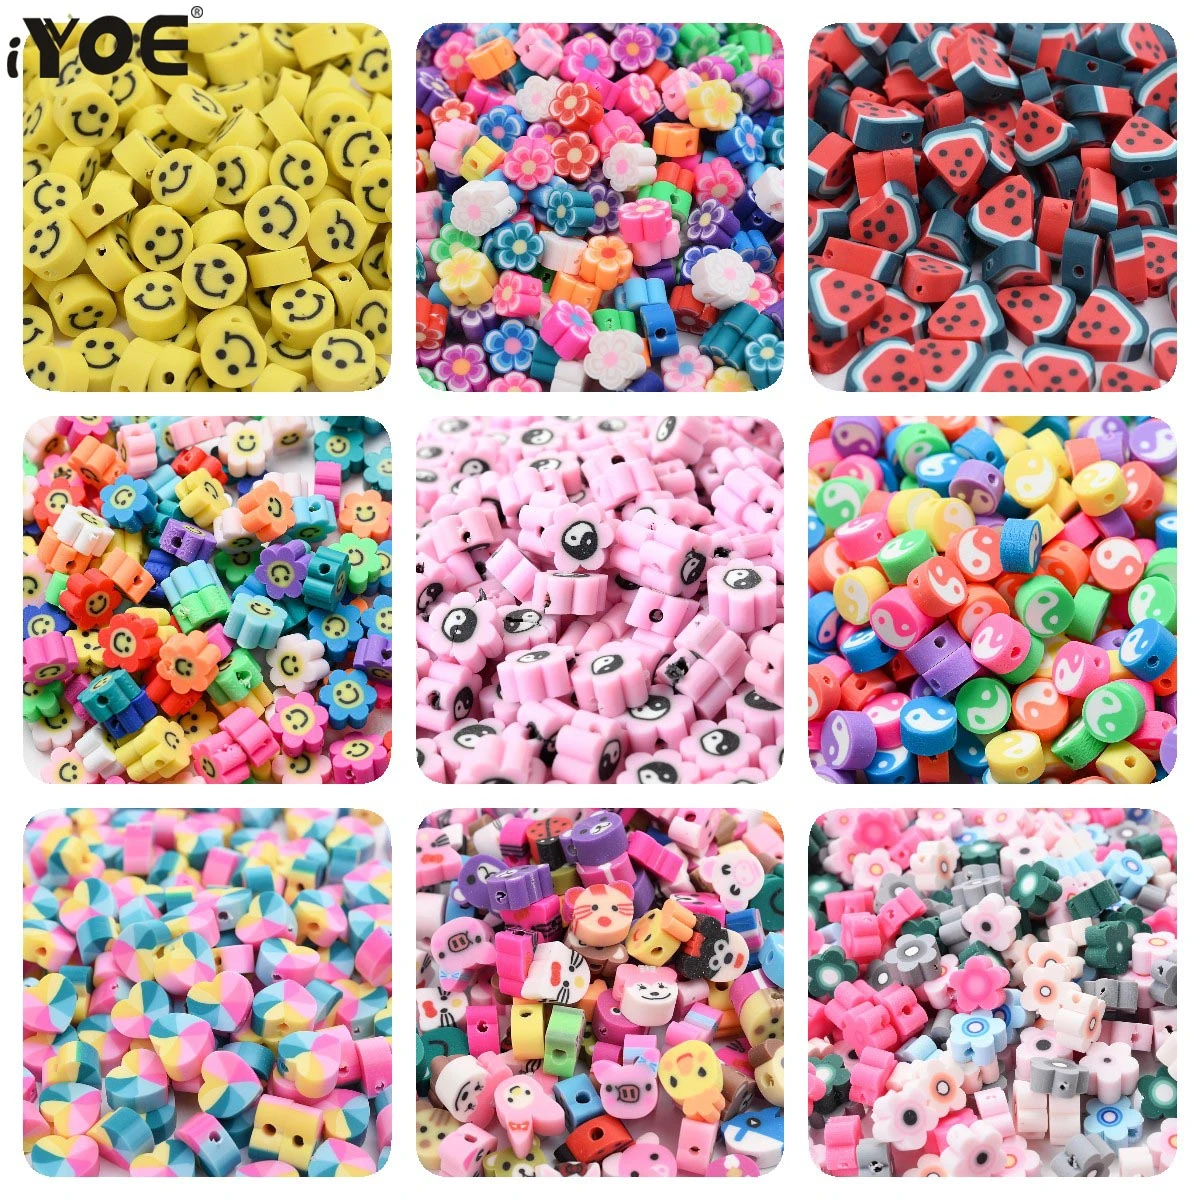 30/50/100pcs Animal Smiley Beads Polymer Clay Beads Sunflower Pig Frog Fruit Spacer Seed Beads For Jewelry Making DIY Bracelet